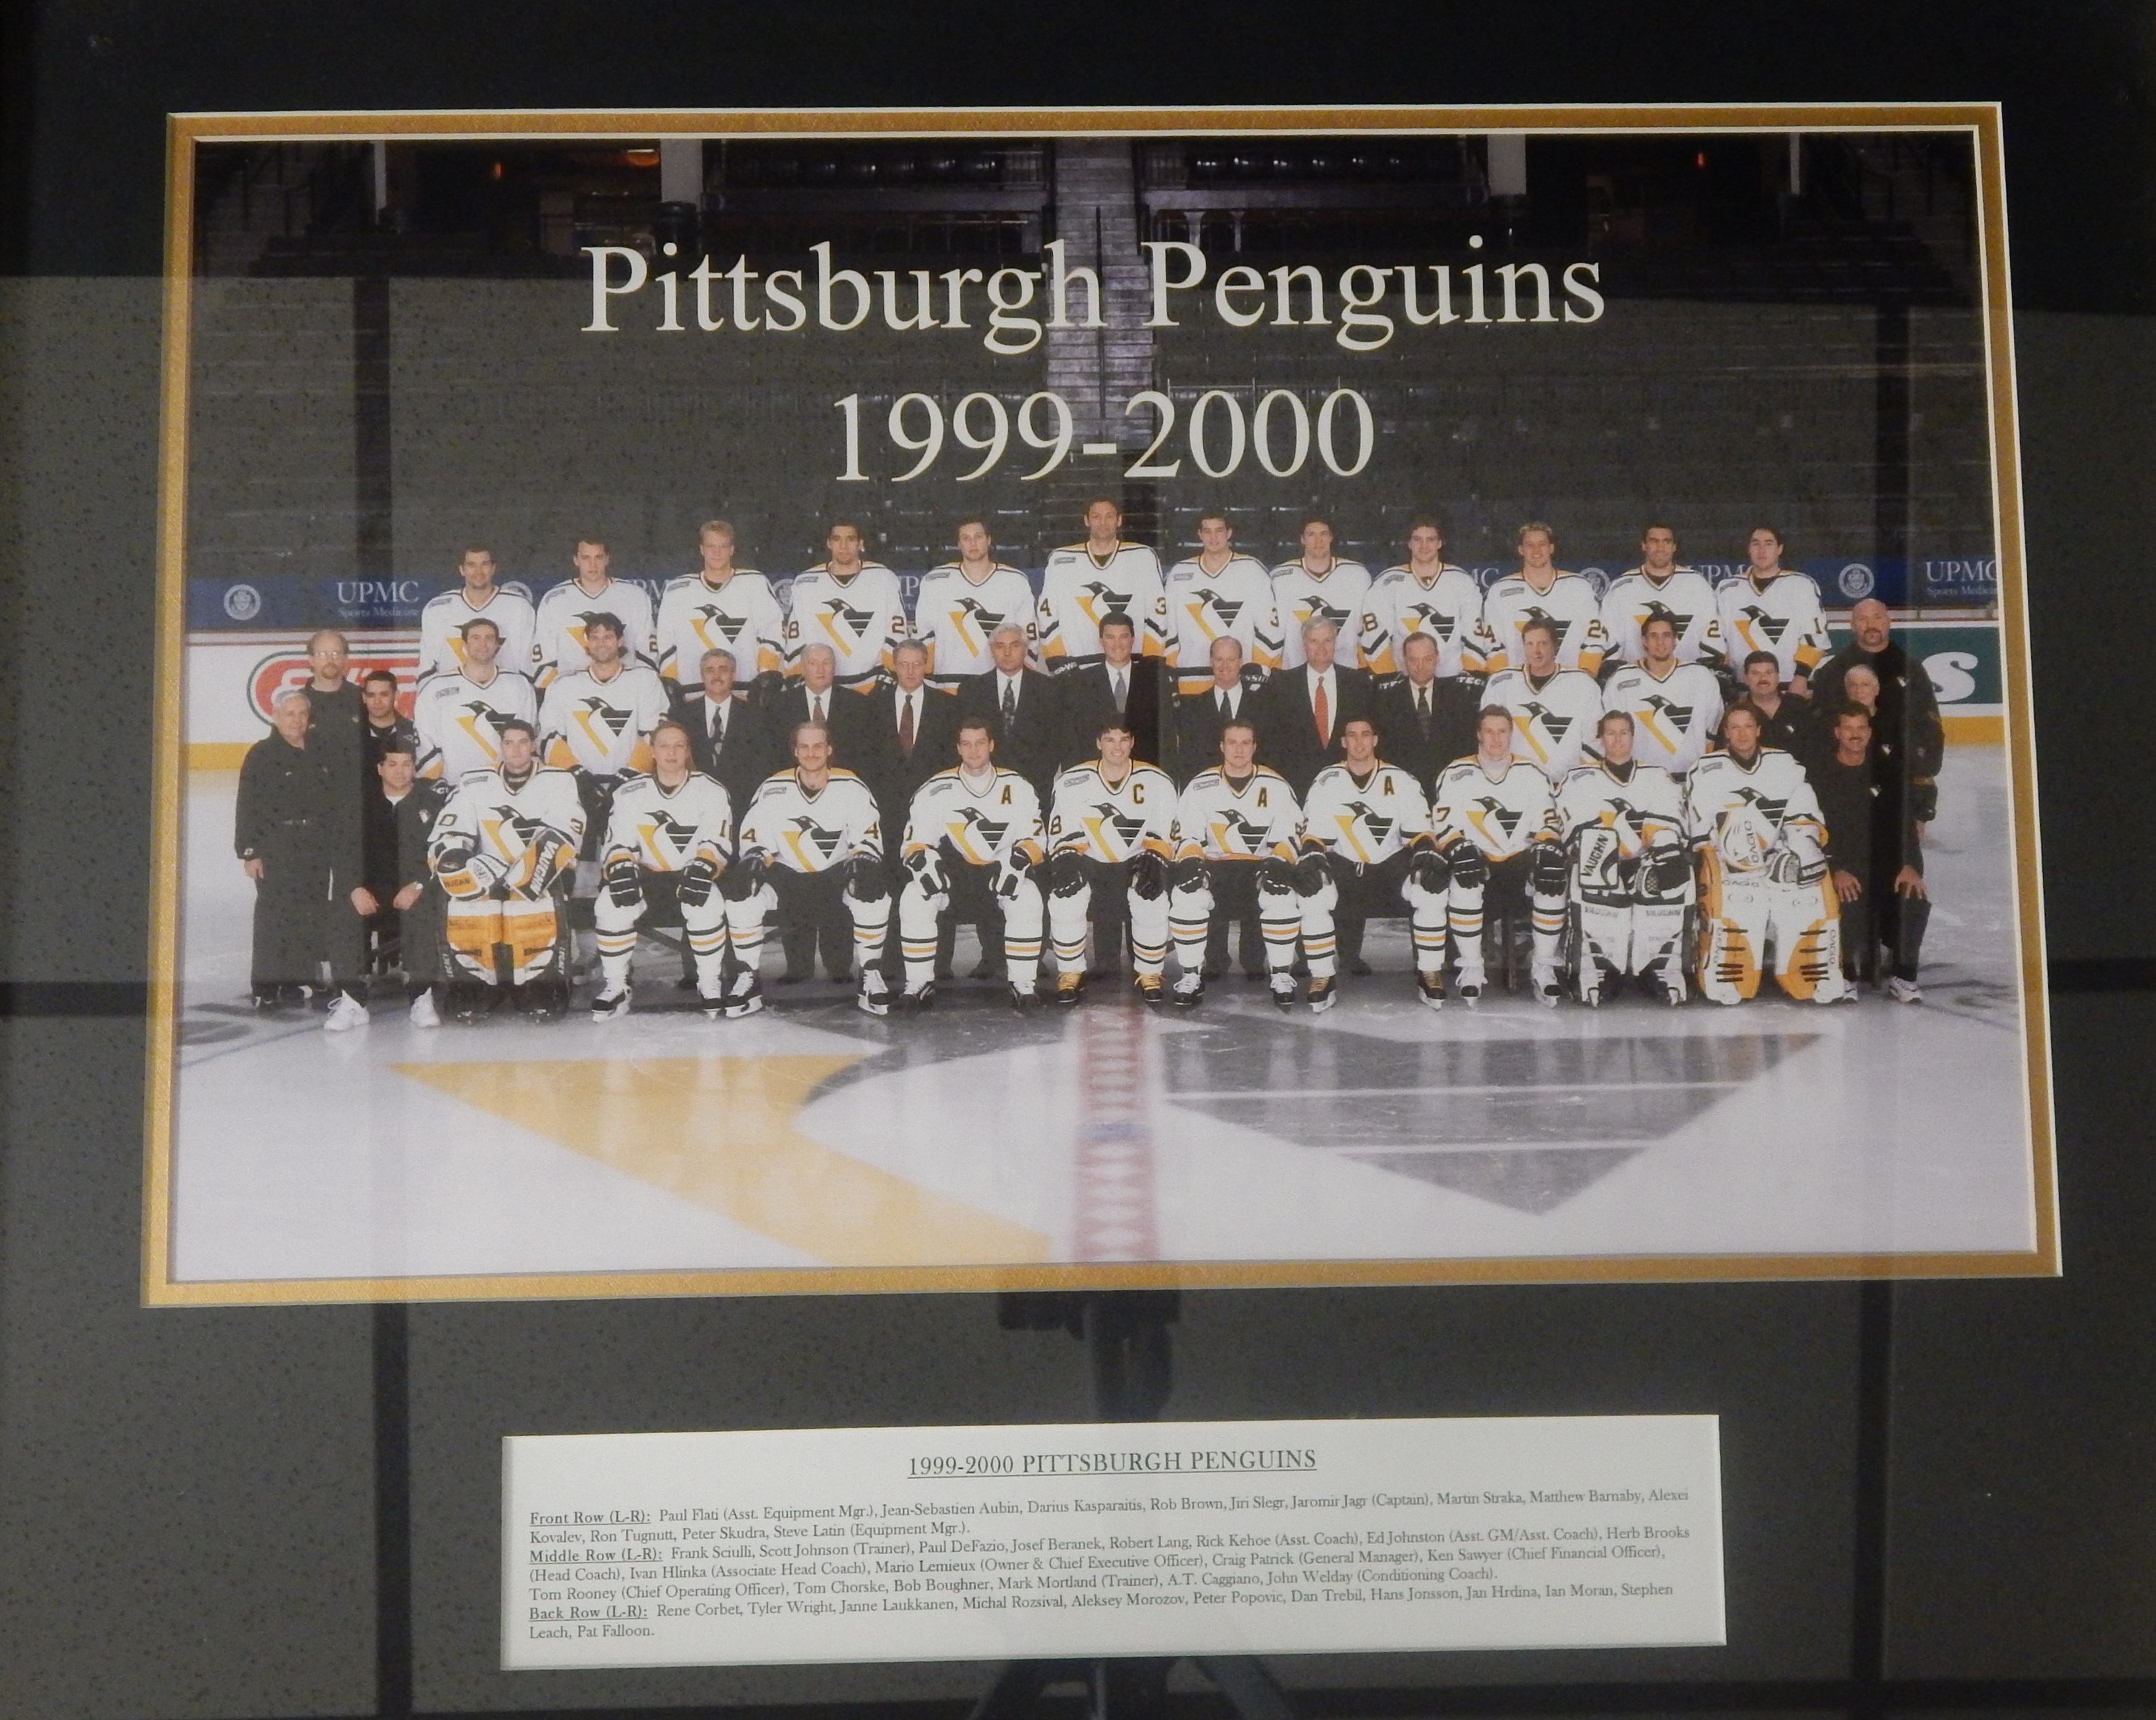 - 1999 Pittsburgh Penguins Team Photograph Once Hung in Civic Center (ex-Pitt Penguins Exec)